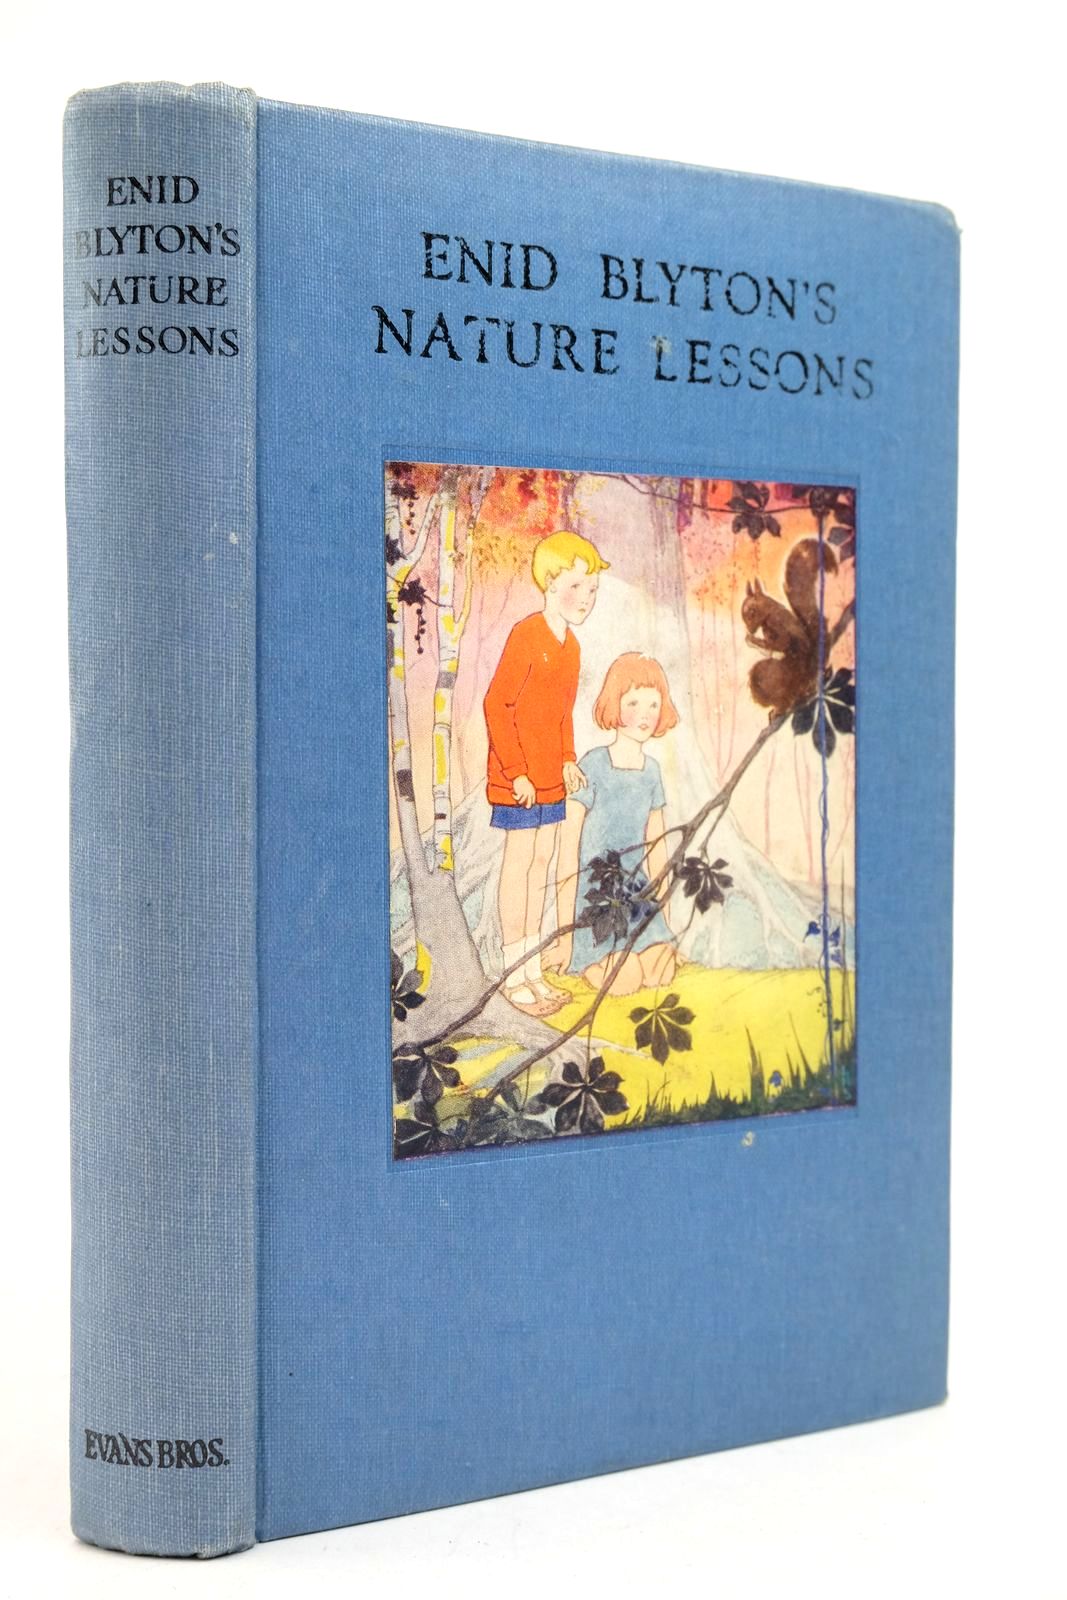 Photo of ENID BLYTON'S NATURE LESSONS written by Blyton, Enid published by Evans Brothers Limited (STOCK CODE: 2139788)  for sale by Stella & Rose's Books